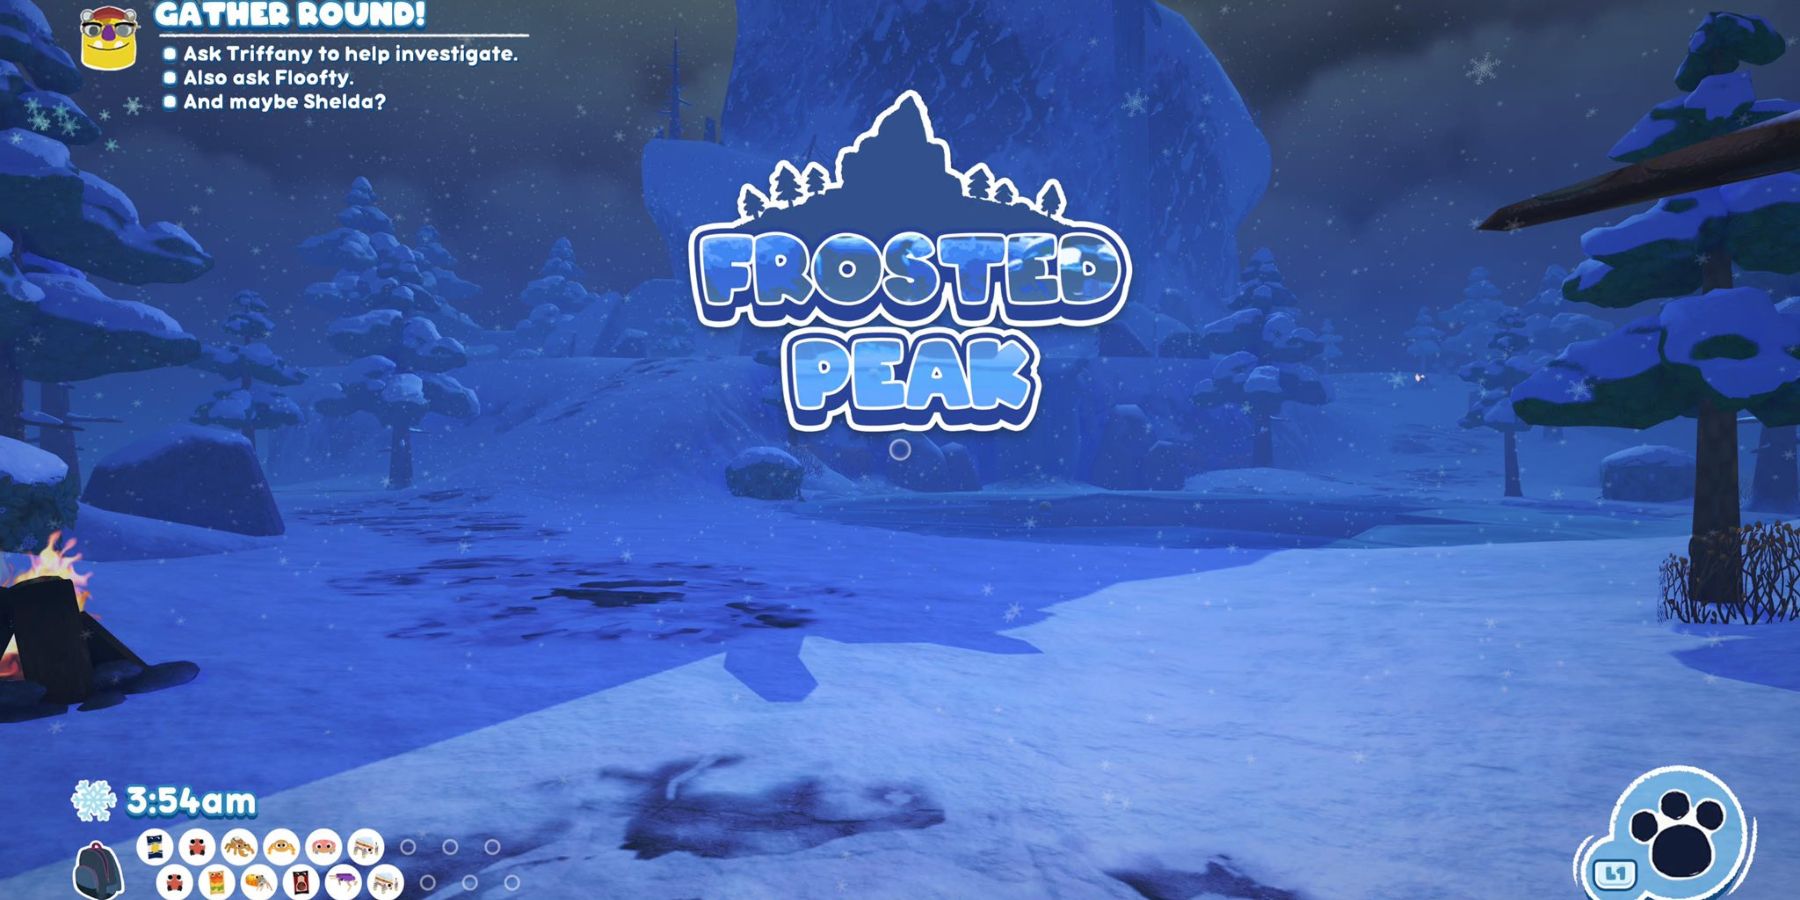 a snow-covered landscape with the words "Frosted Peak" under a silhouette of a mountain in the middle of the screen